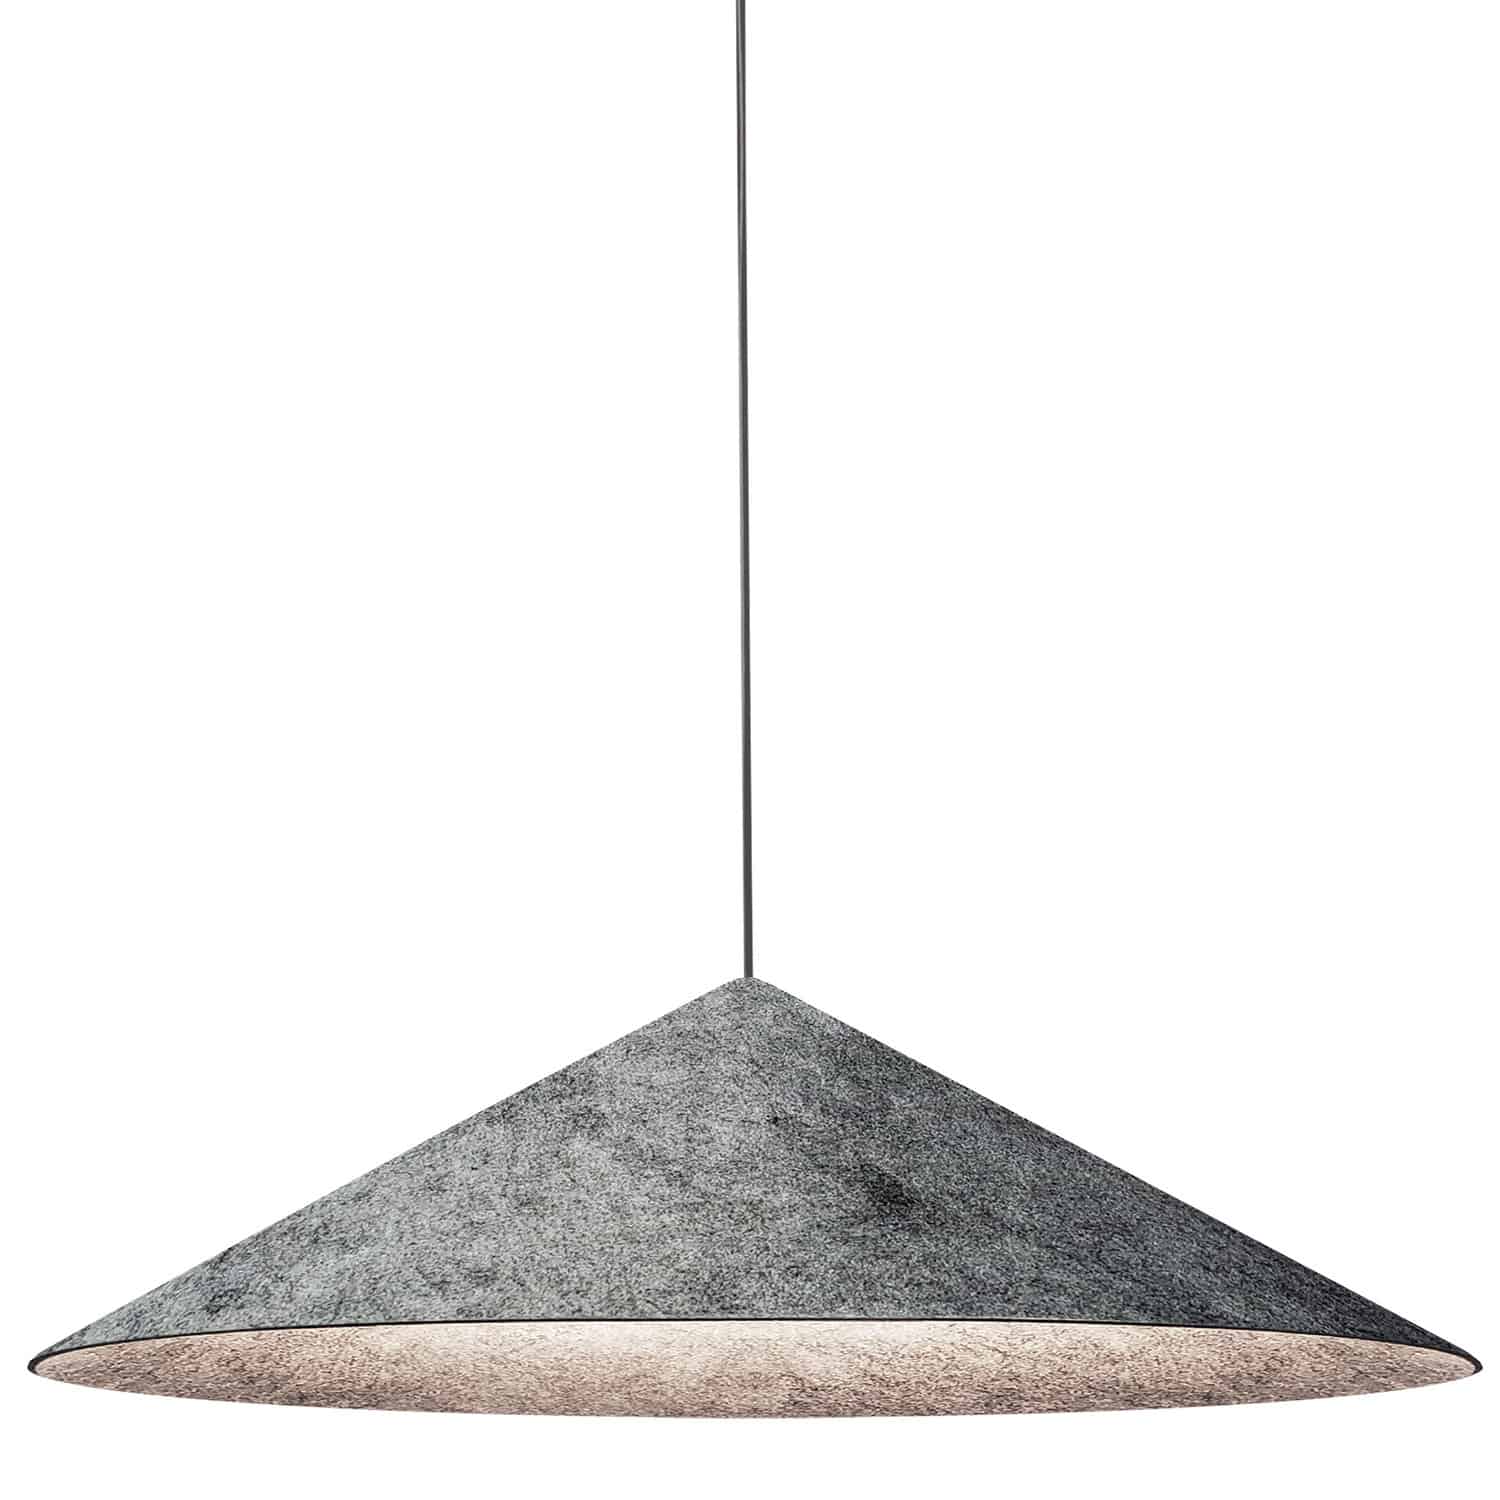 Minimalist in its design aesthetic, and versatile in its appeal, the Jessica family of lighting features a subtle sense of style. It's a look that is contemporary in its simplicity. The matte black frame drops into a tapered drum with a soft gray felt fabric shade. The effect is understated, yet fashionable, and offers a flattering glow of light. With its substantial proportions, Jessica lighting is suitable for major areas of your home, including living and dining rooms and bedrooms, as well as office spaces.